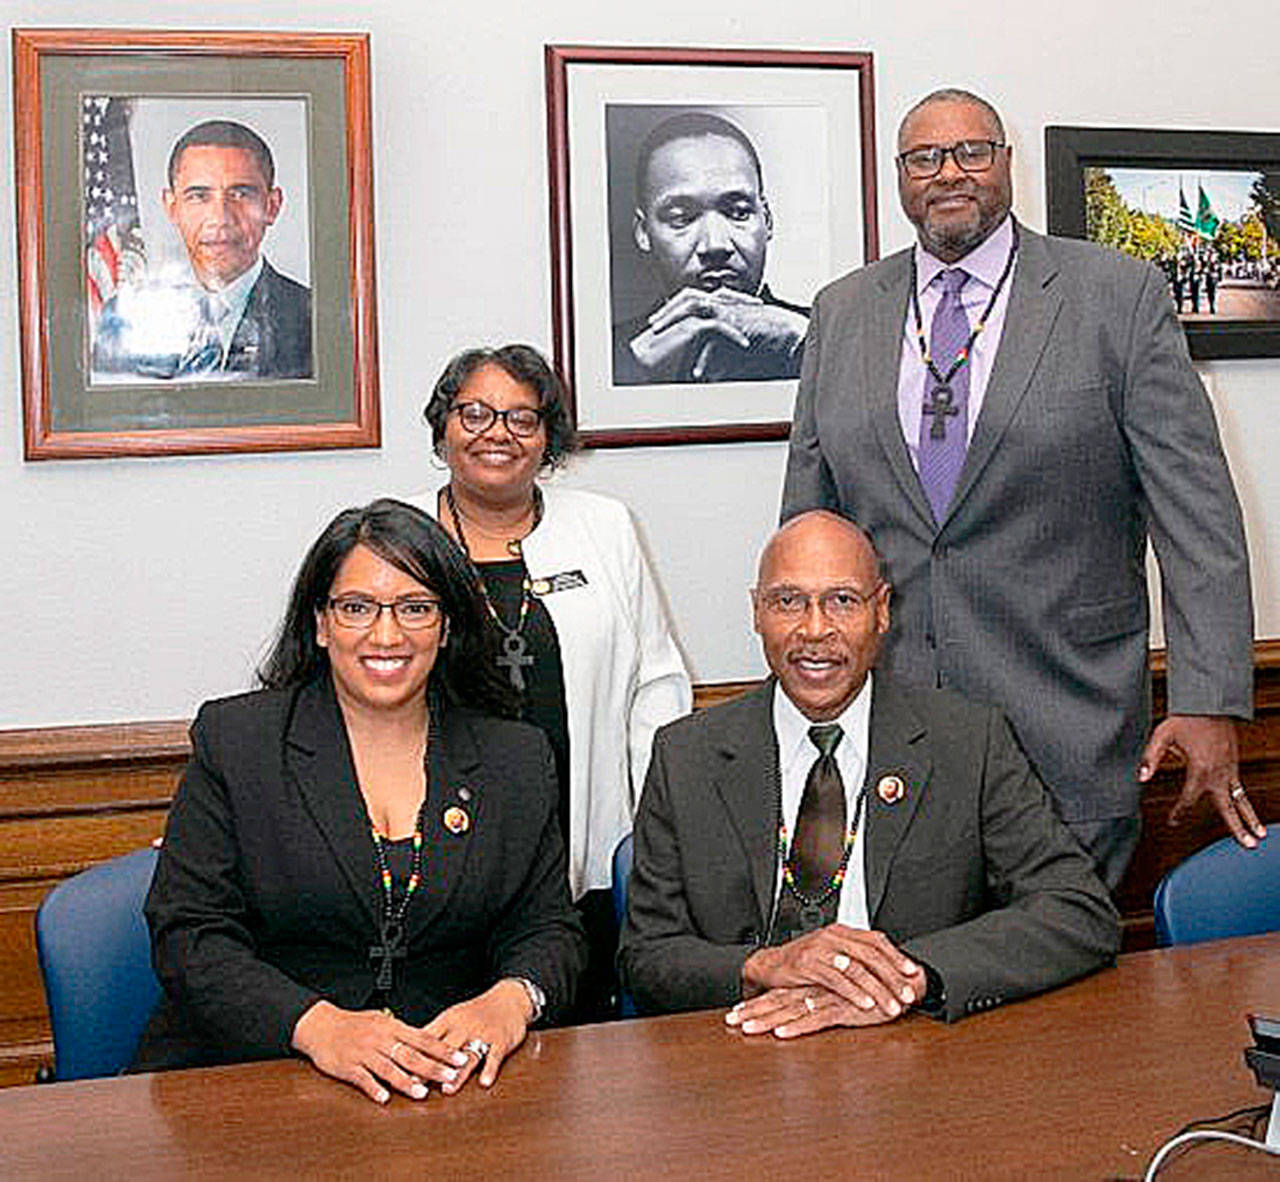 Black Caucus members of the state Legislature, from left: Reps. Kristine Reeves, Debra Entenman (of Kent), John Lovick and Eric Pettigrew. Not pictured: Rep. Melanie Morgan. COURTESY PHOTO, LSS Photography